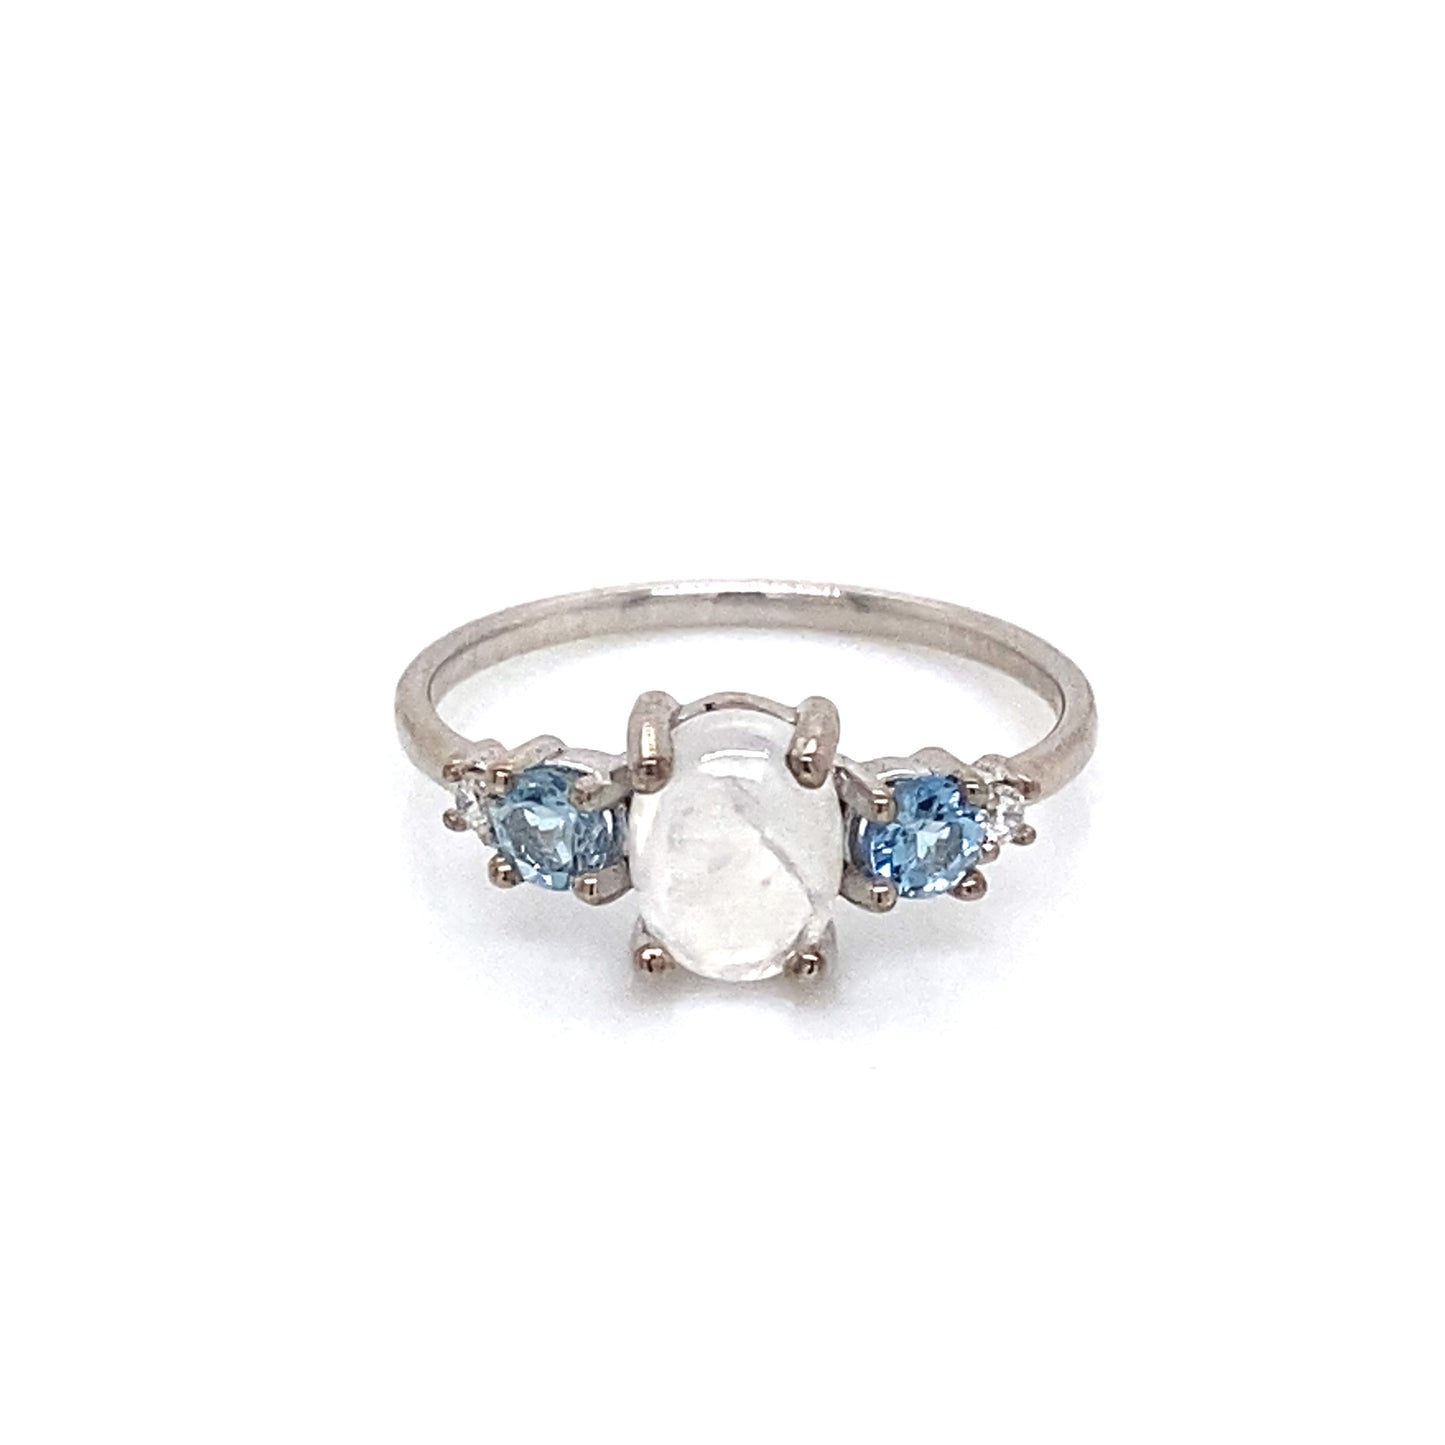 Moonstone Cabochon Ring with Aquamarines and Diamonds